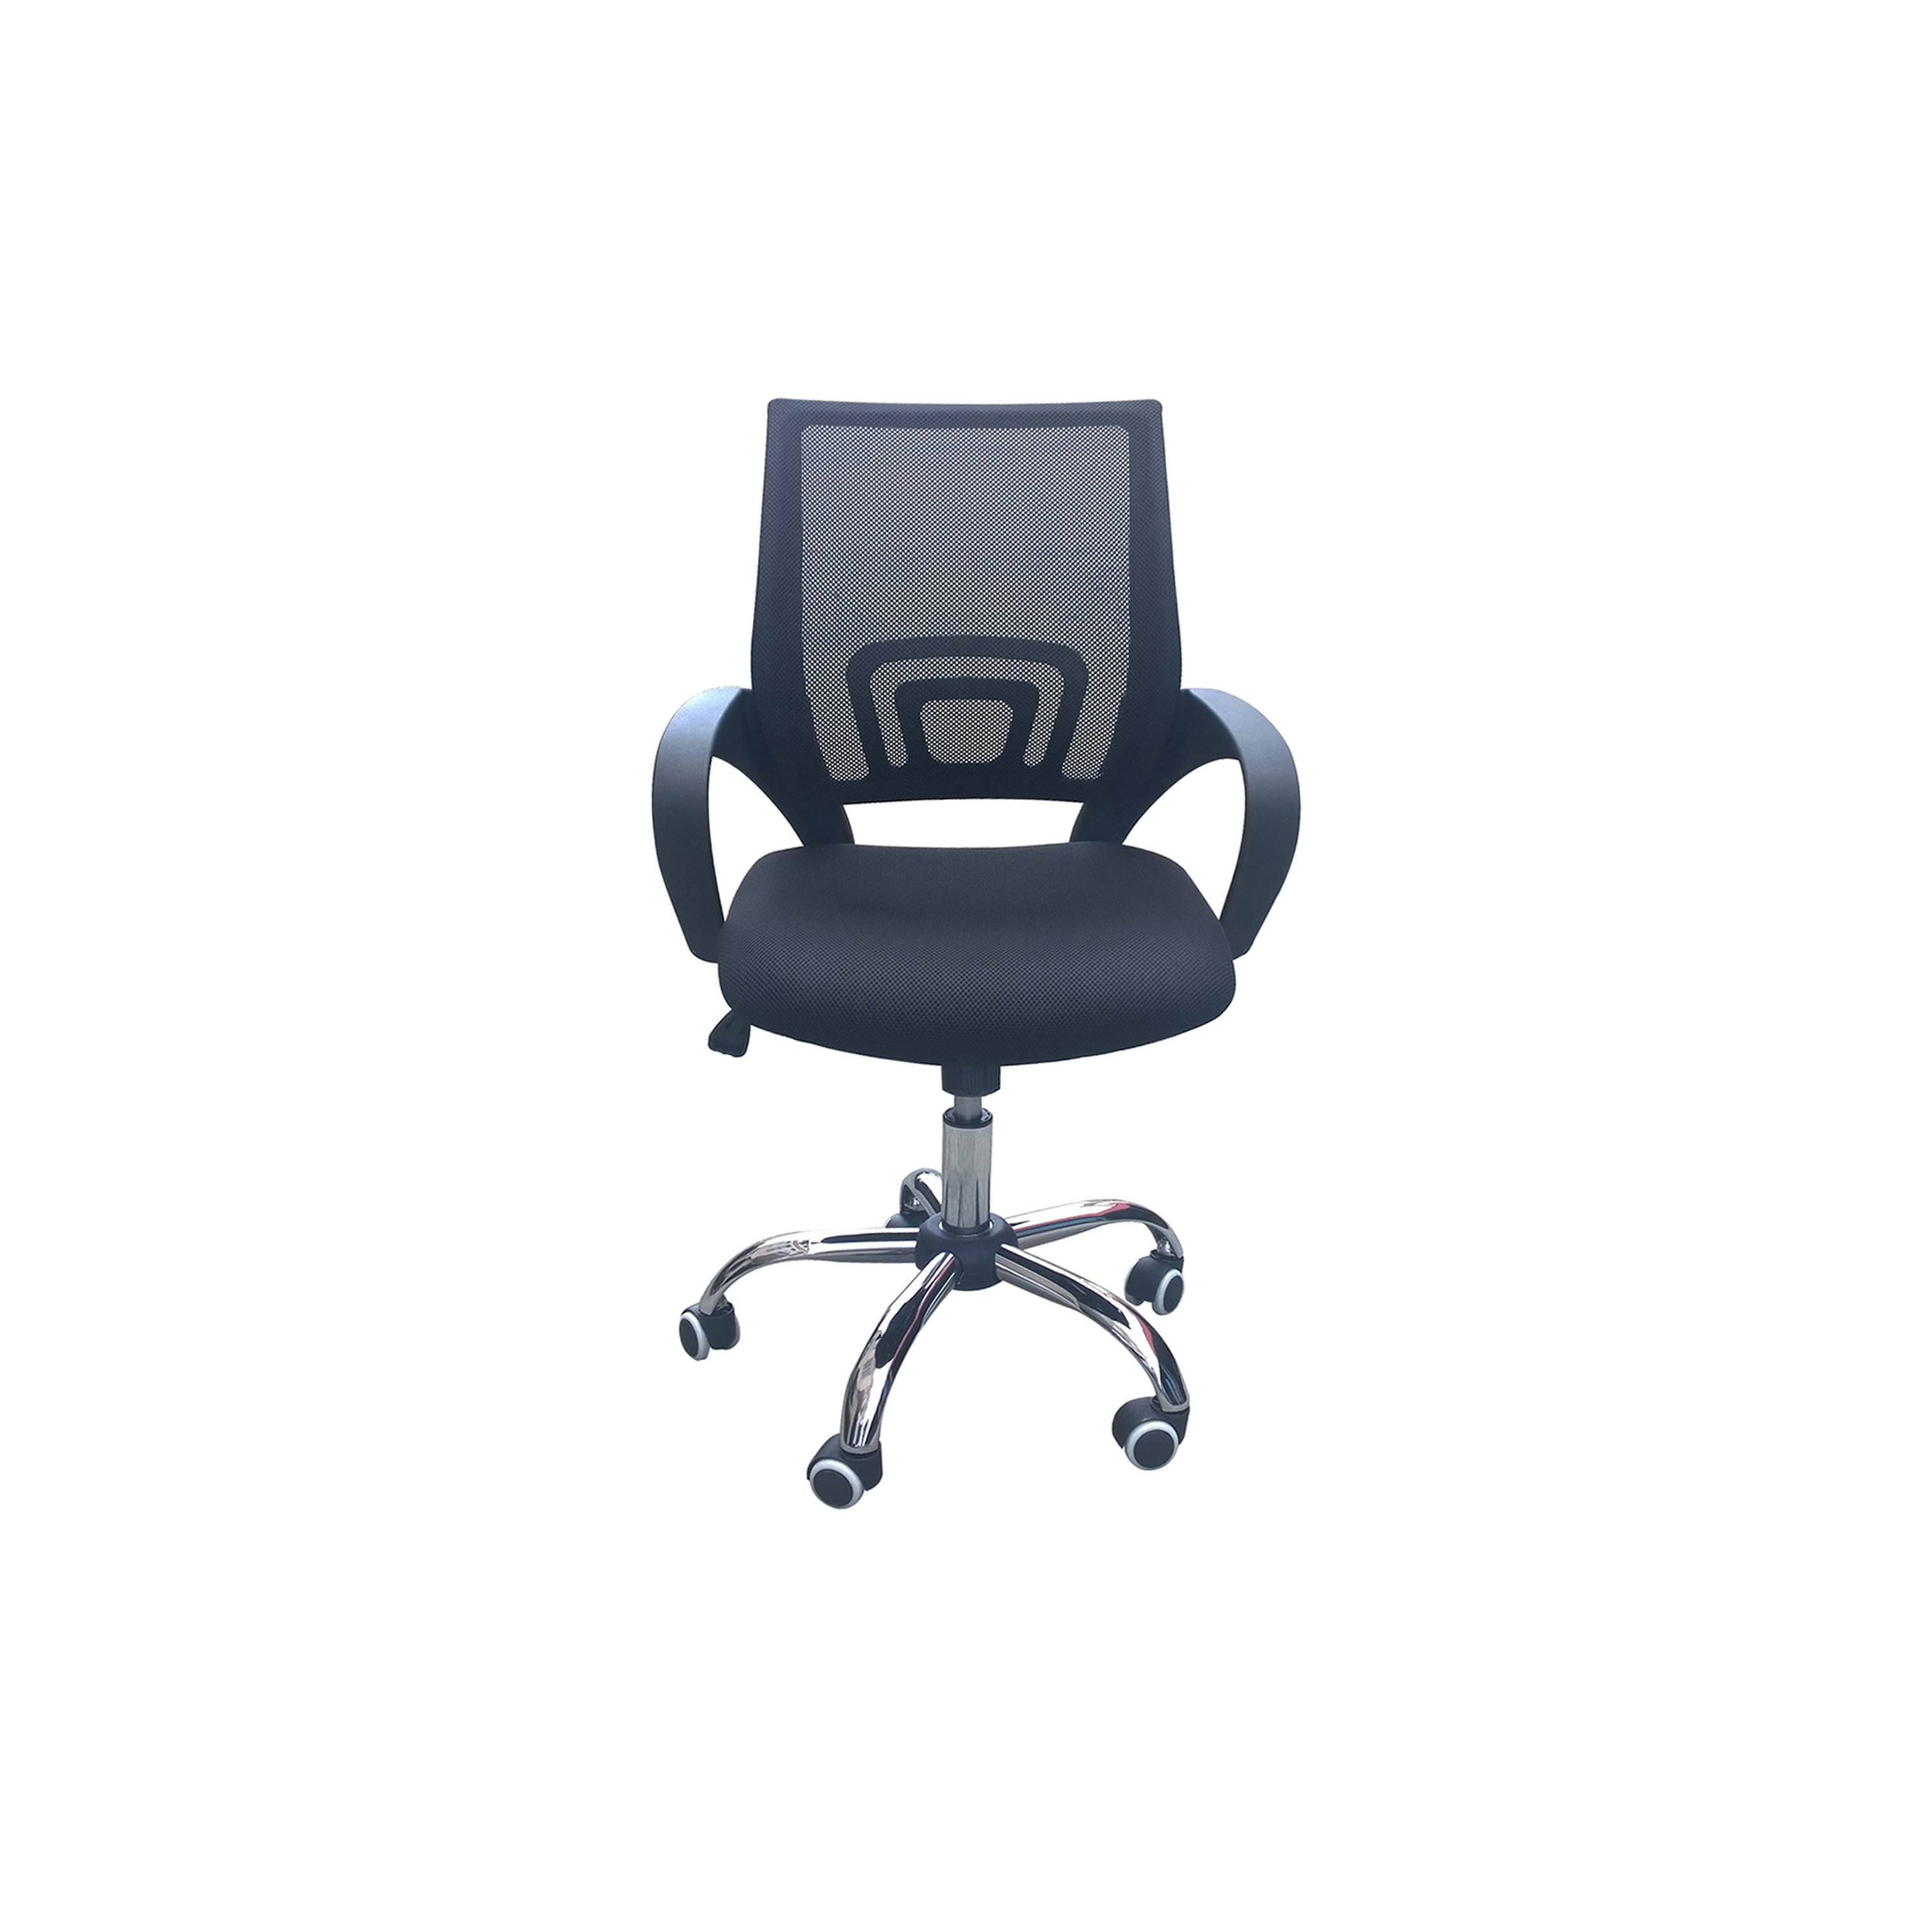 LPD Tate Mesh Back Office Chair Black - image 1